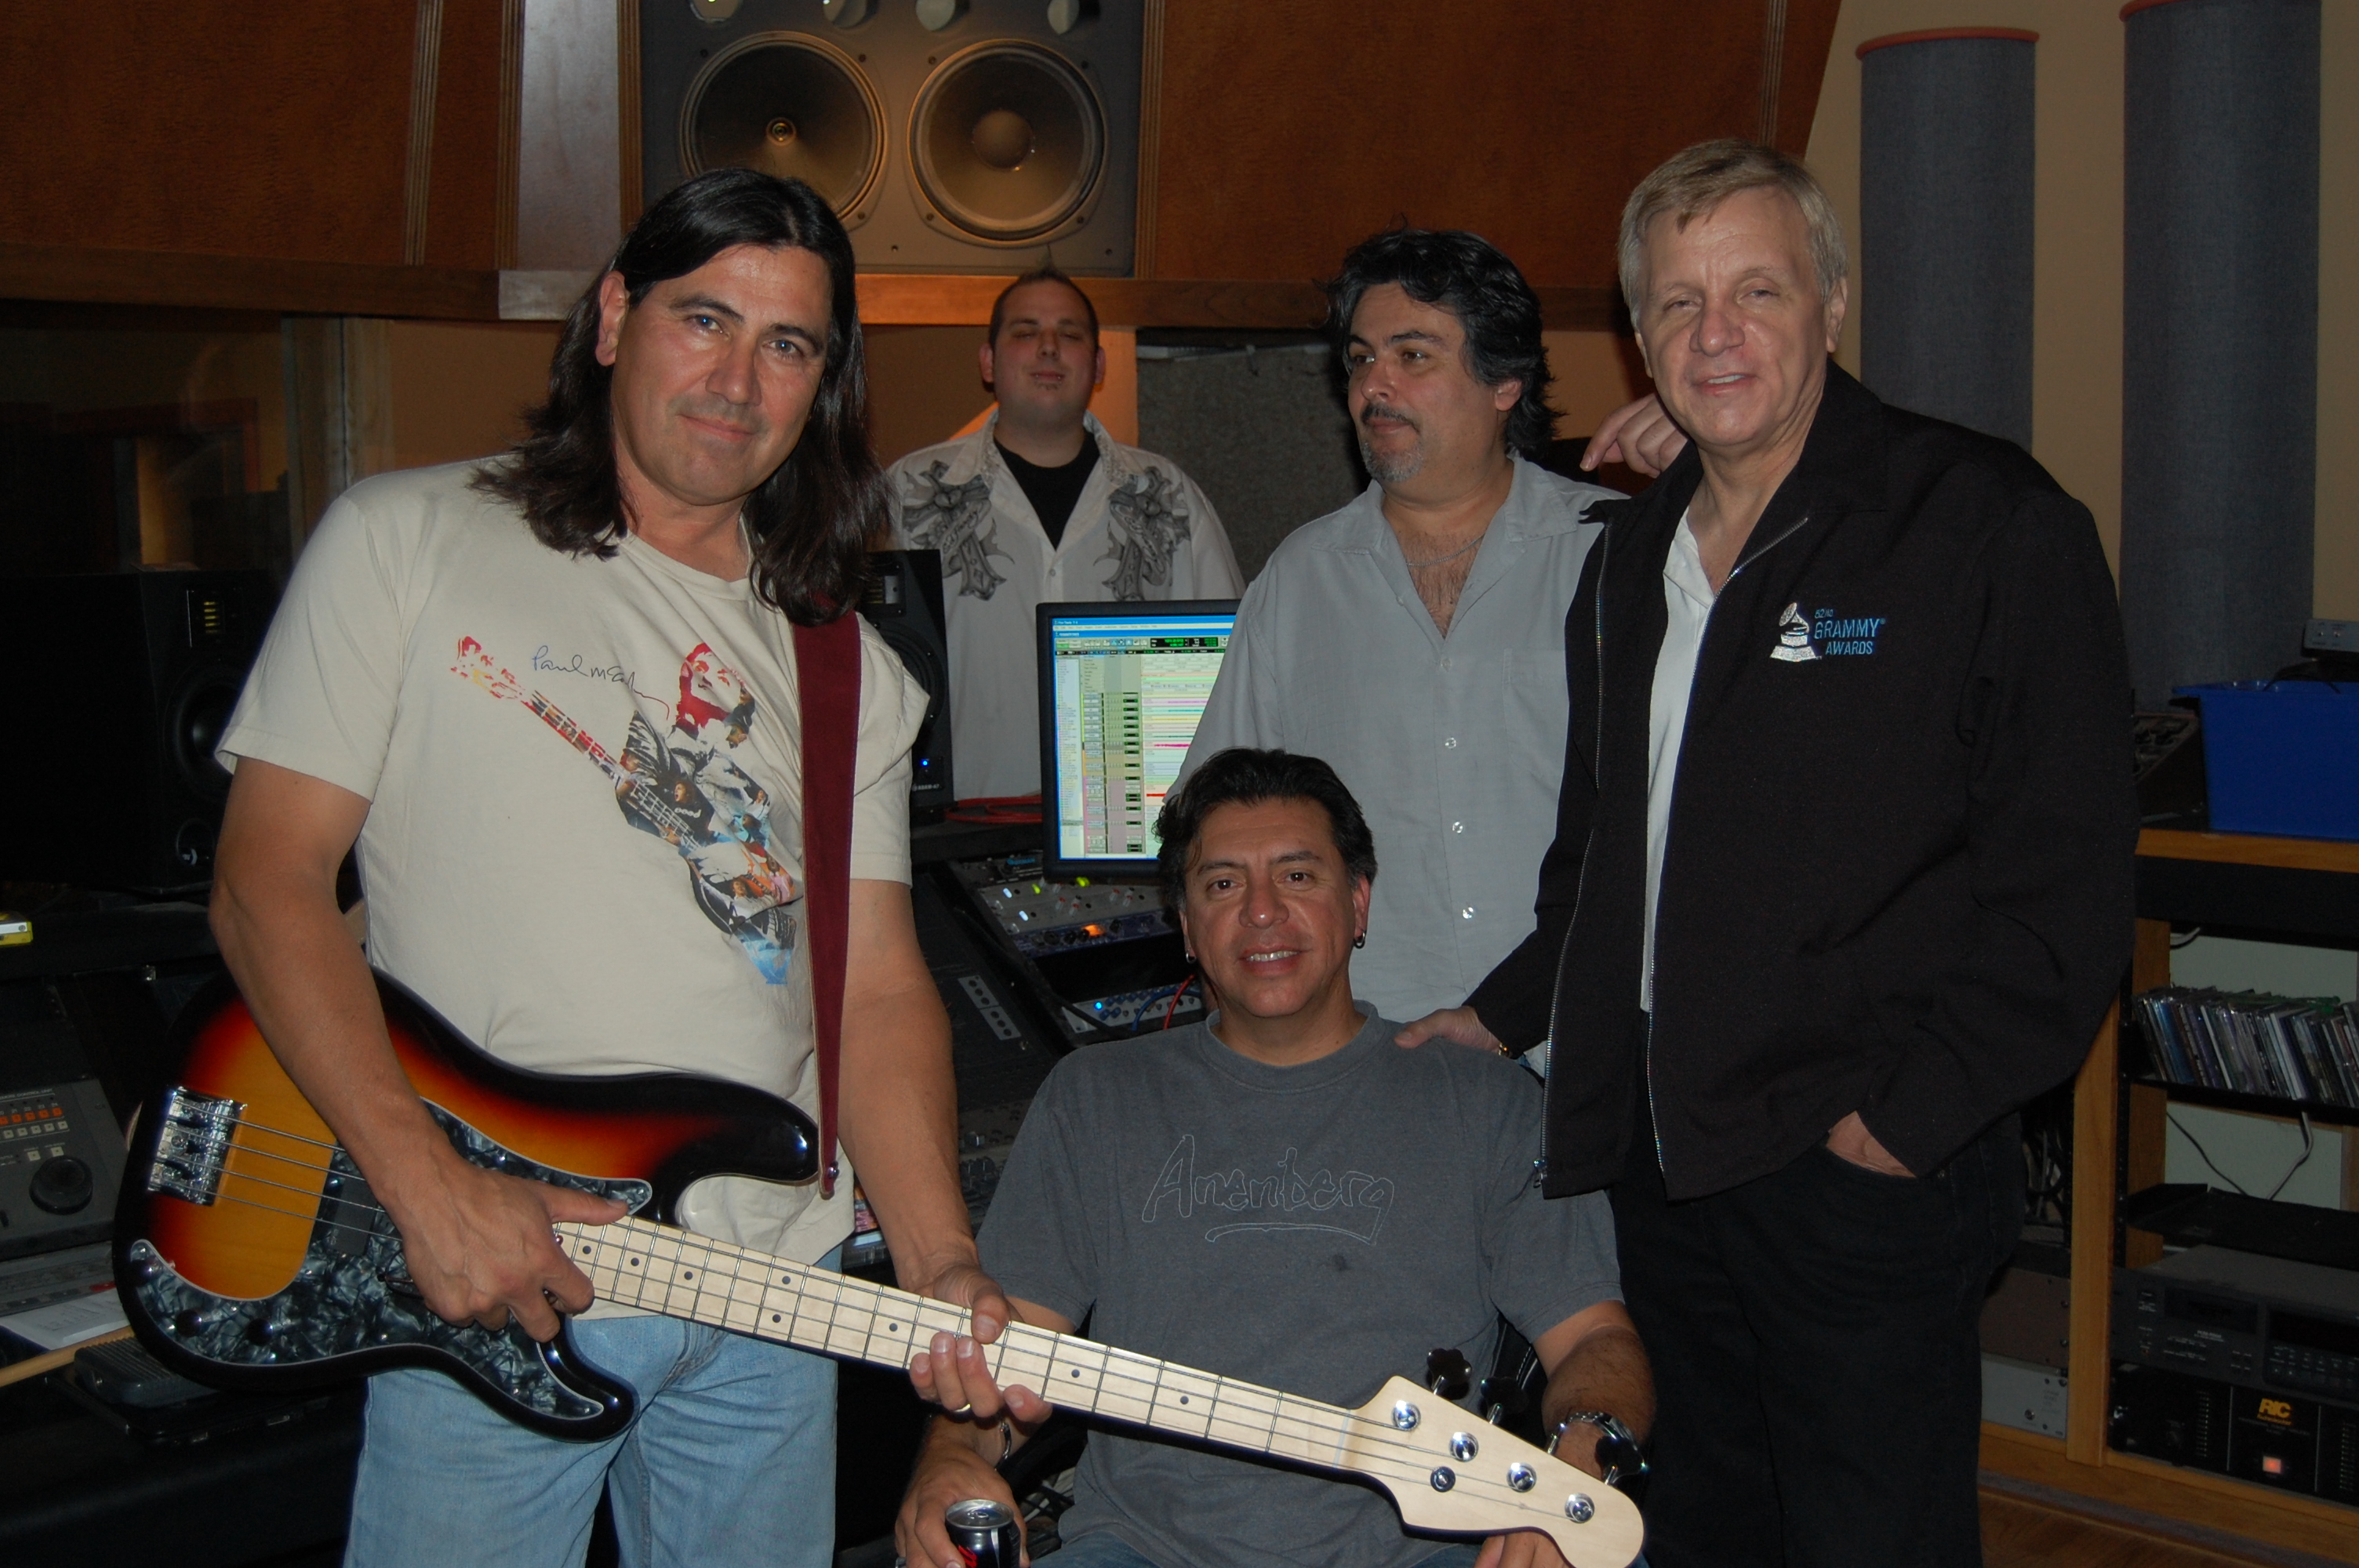 Kim Richards in studio (producing) Luis Cardenas (seated), along with studio musician Tommy Rojo (standing) and Allied Artists' Chief Engineer David Franklin (rear) and Exec Asst to the CEO, Danny Ramos (behind Cardenas)